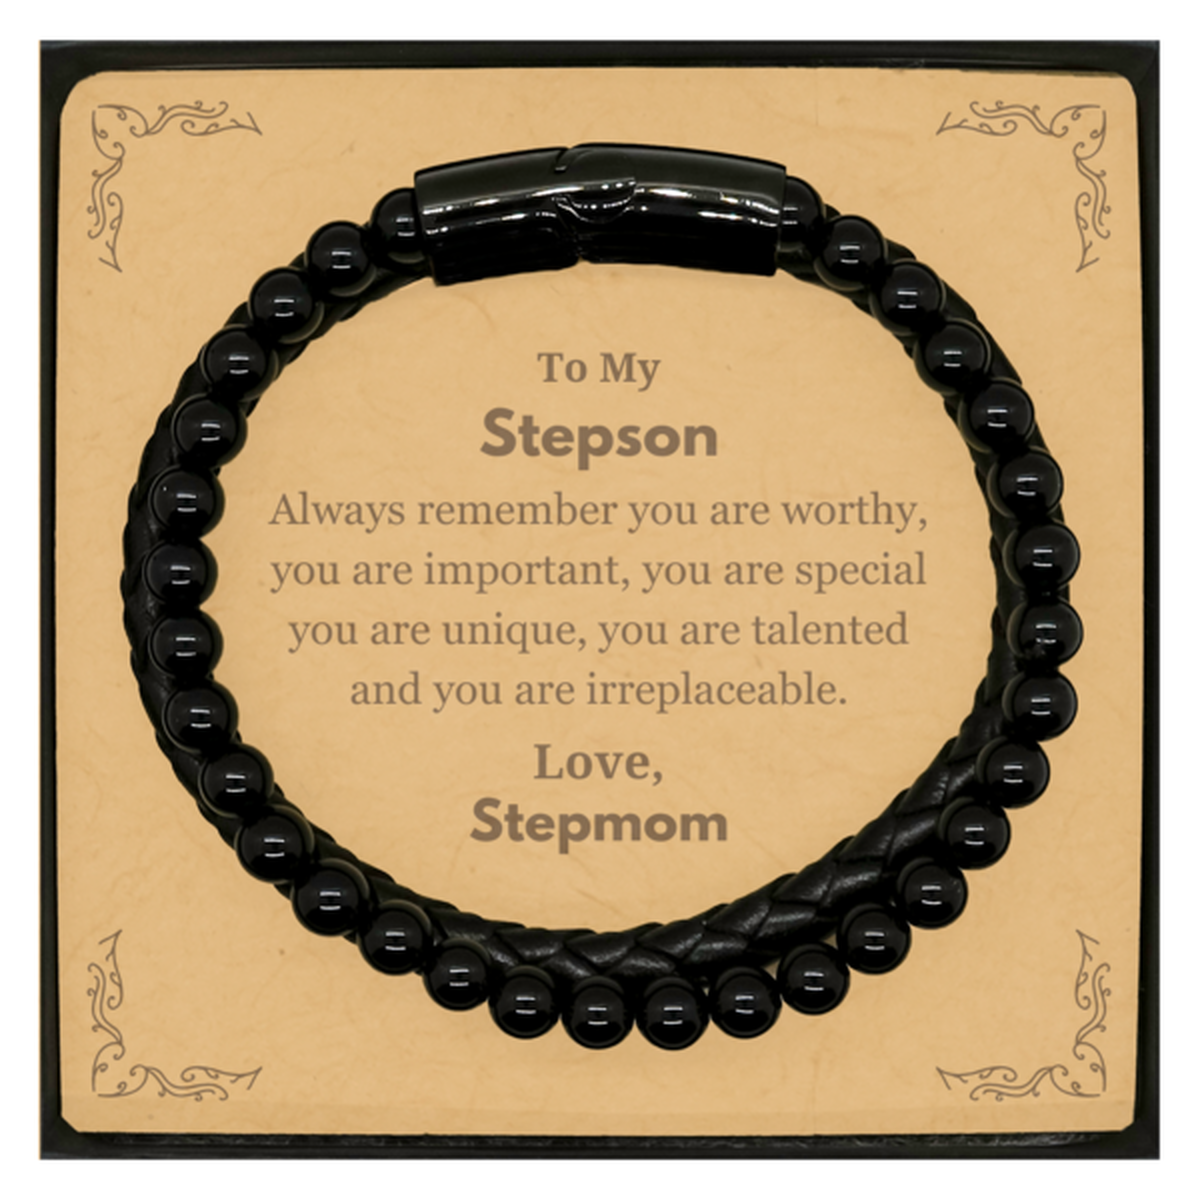 Stepson Birthday Gifts from Stepmom, Inspirational Stone Leather Bracelets for Stepson Christmas Graduation Gifts for Stepson Always remember you are worthy, you are important. Love, Stepmom